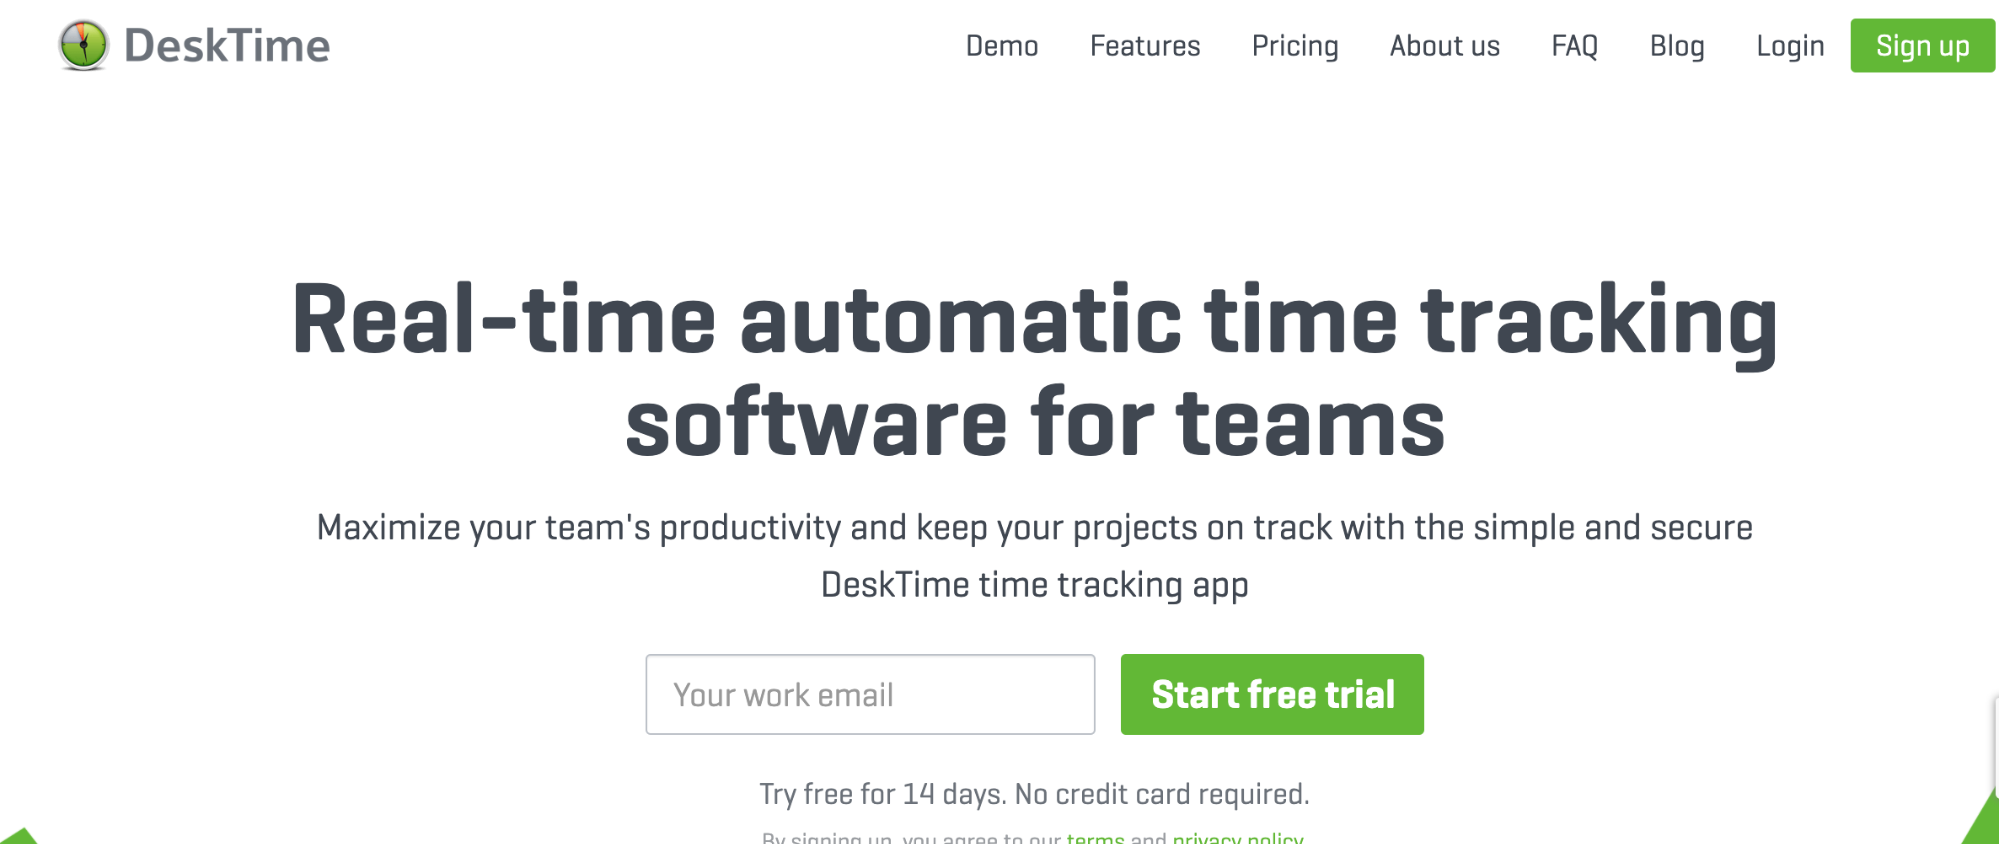 Desktime, a tool for remote workers